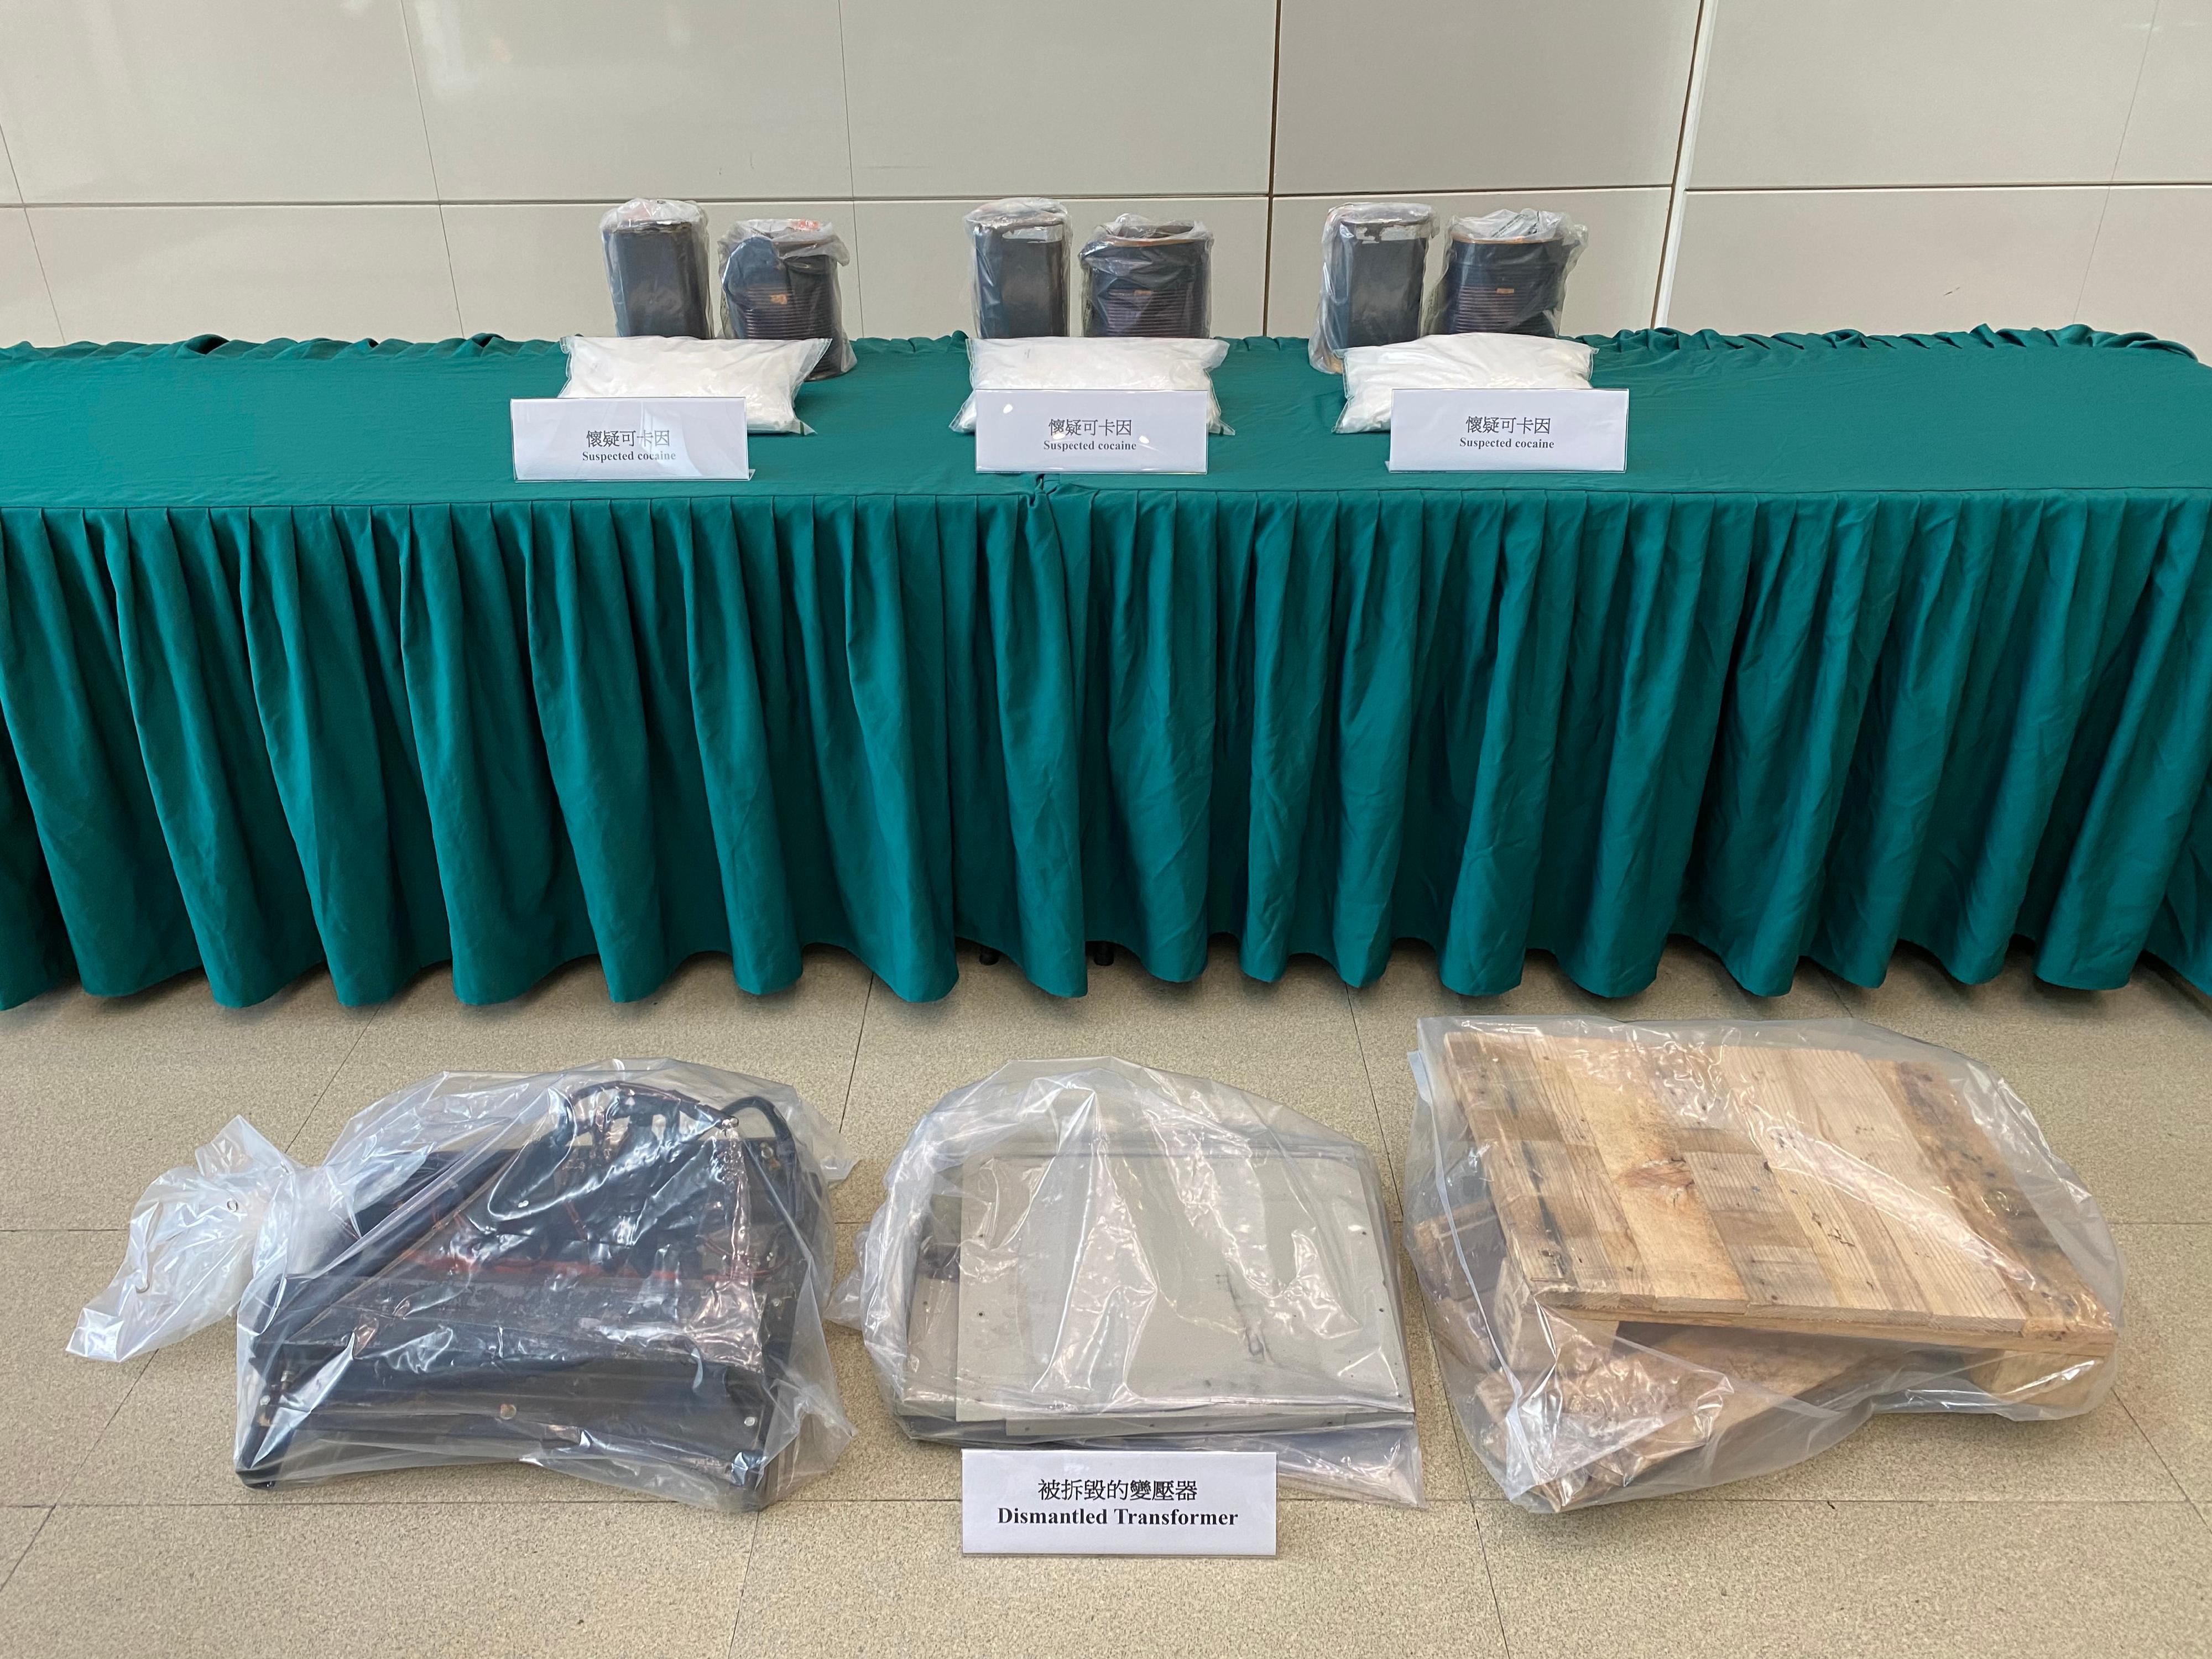 The Customs and Excise Department of Hong Kong (Hong Kong Customs) jointly mounted an anti-narcotics operation, codenamed "Yunzhan-duanliu 2023", with the Anti-Smuggling Bureau of the General Administration of Customs of the People's Republic of China (GACC), the Anti-Smuggling Bureau of the Guangdong Sub-Administration of the GACC, and the Anti-Smuggling Bureau of Shenzhen Customs starting from January 1. On the first day (January 1) of the operation, Hong Kong Customs seized about 9 kilograms of suspected cocaine with an estimated market value of $8 million at Hong Kong International Airport. Photo shows the suspected cocaine found by Customs officers inside a transformer and some of the parts of the transformer.